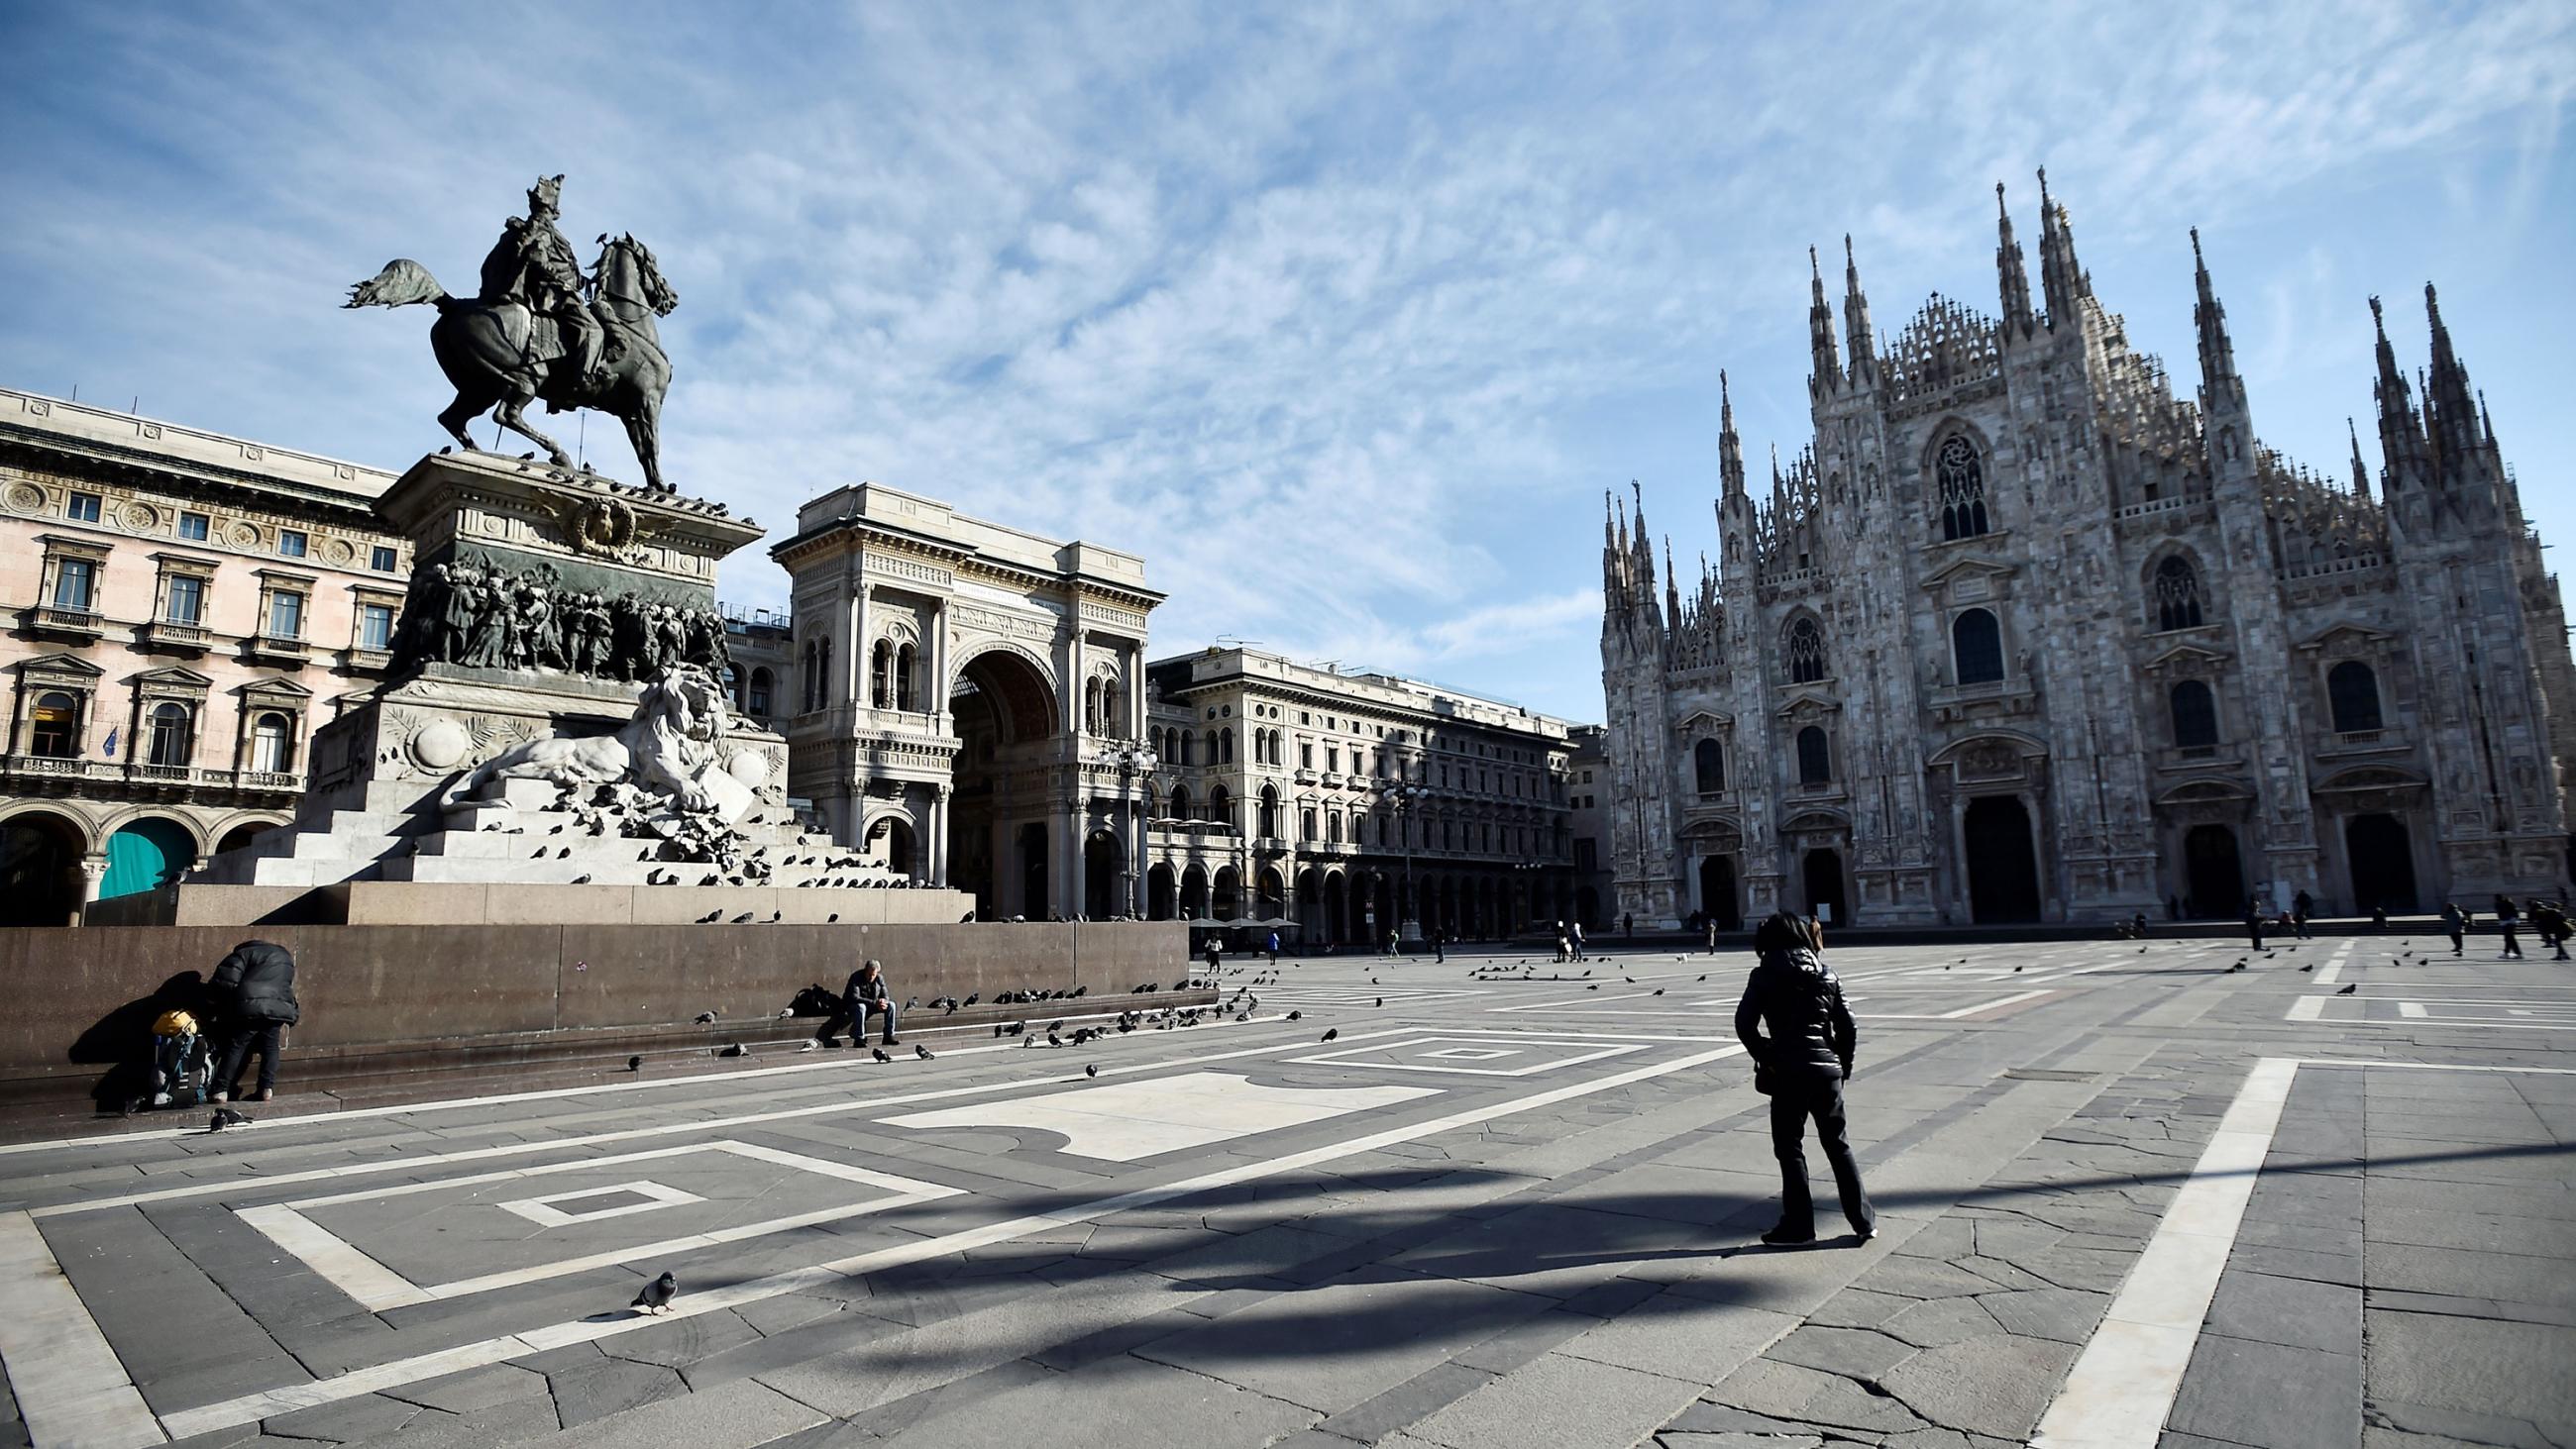 The photo shows the architecturally spectacular square and tourist destination all but empty—more pigeons than people. 